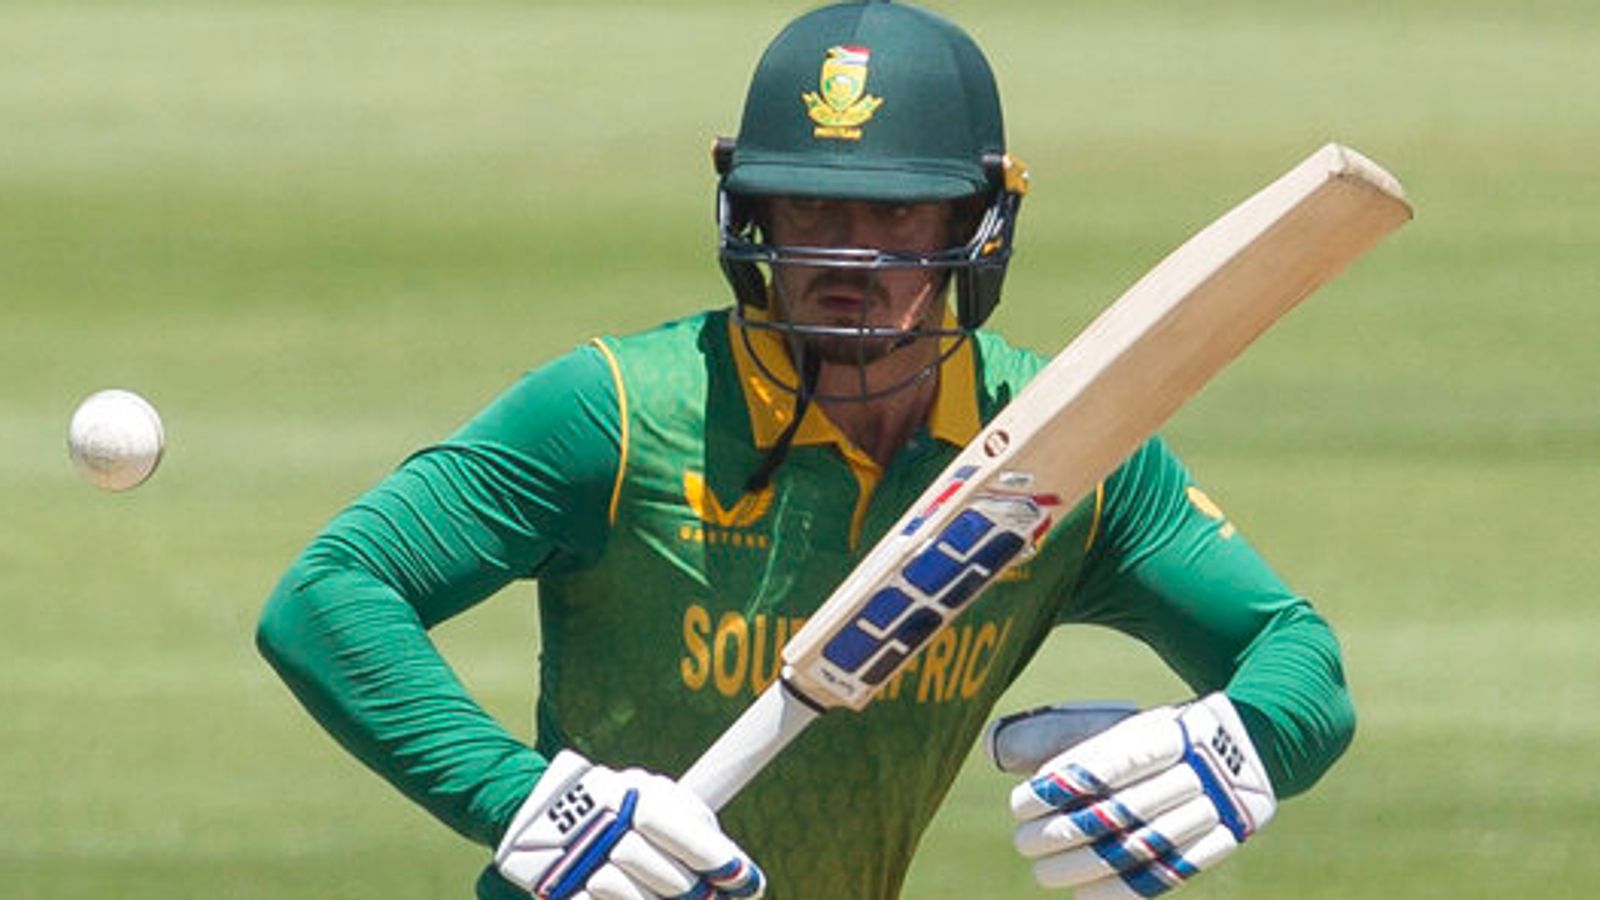 South Africa complete clean sweep in ODI series against India thanks to Quinton de Kock's century